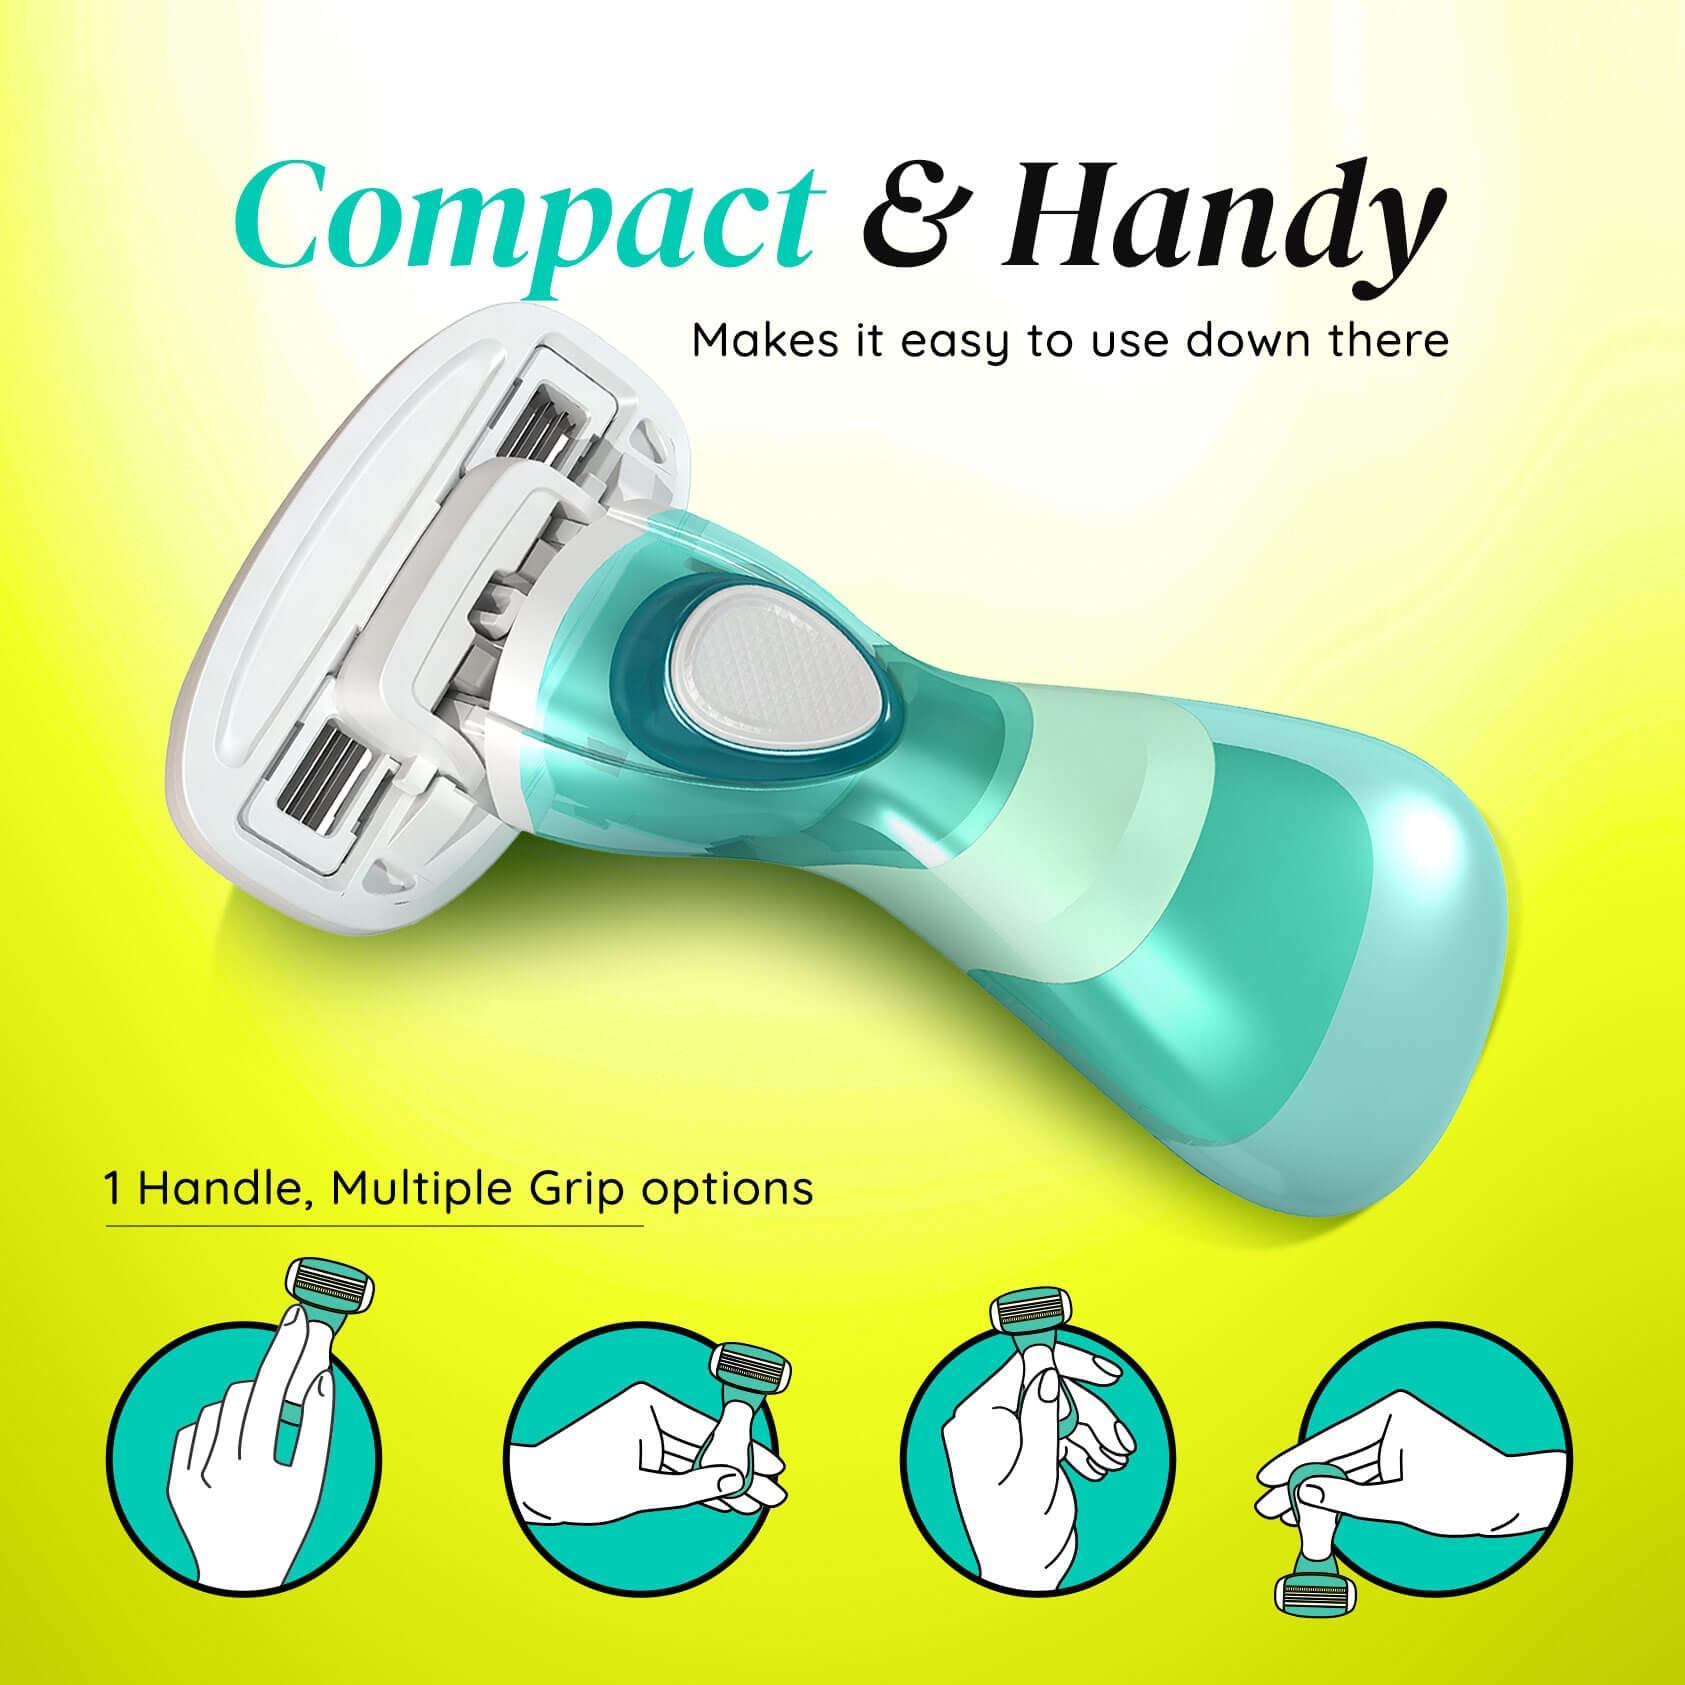 LetsShave | LetsShave Body and Groin Razor for Men with free Transparent Shave Gel | 3 Blade painless Groin and Body Hair Remover with Dual Moisture Bars | Compact Razor with Clamshell Travel Case 6